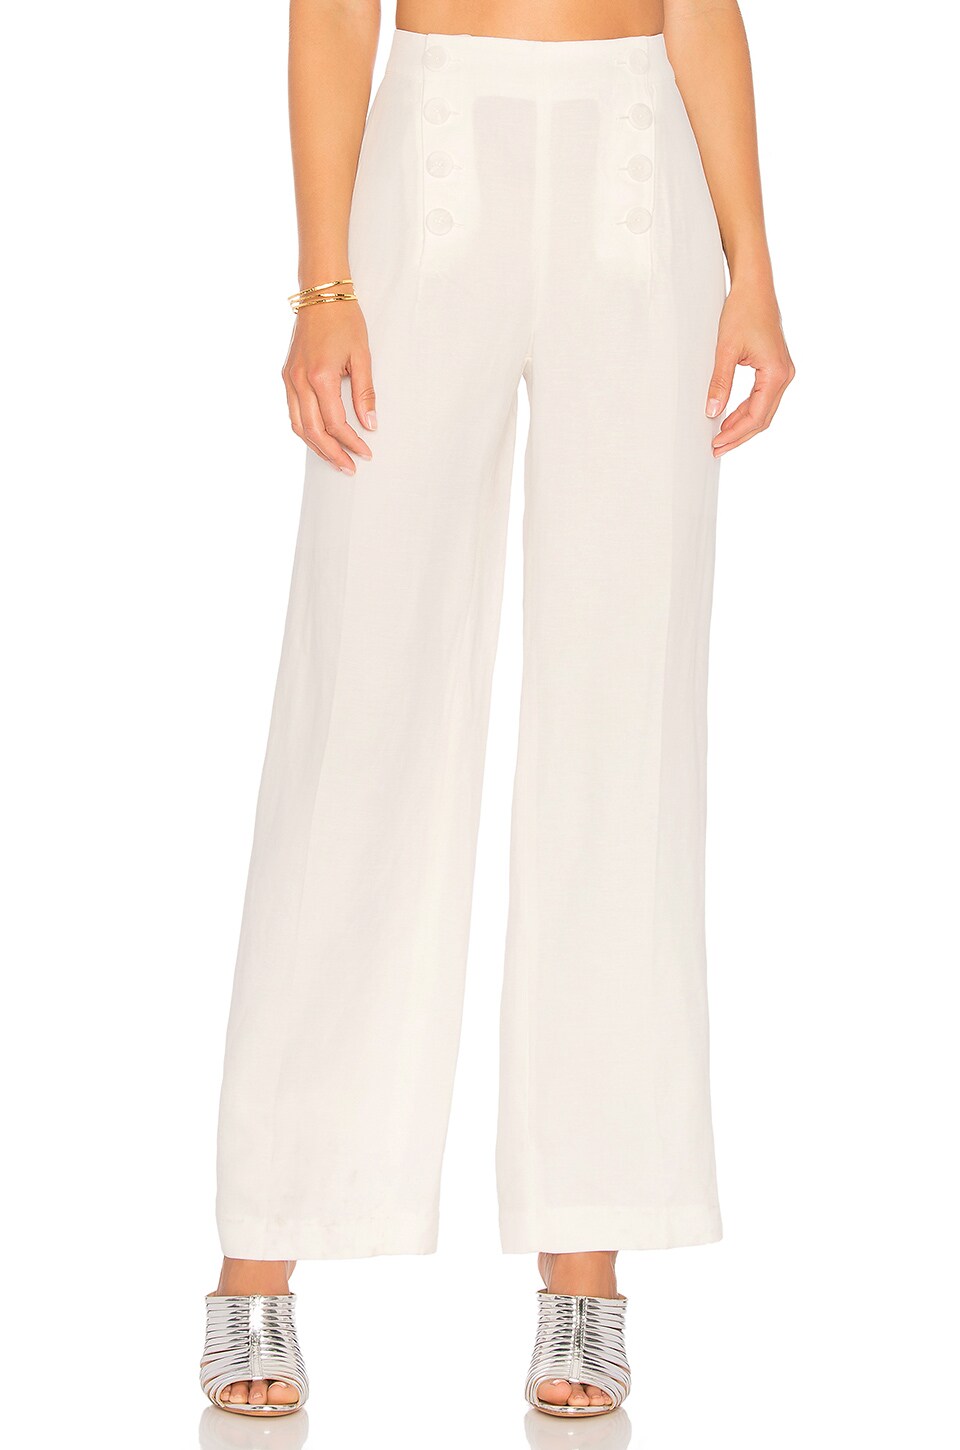 CUPCAKES AND CASHMERE 'Studio' Wide Leg Pants in White | ModeSens